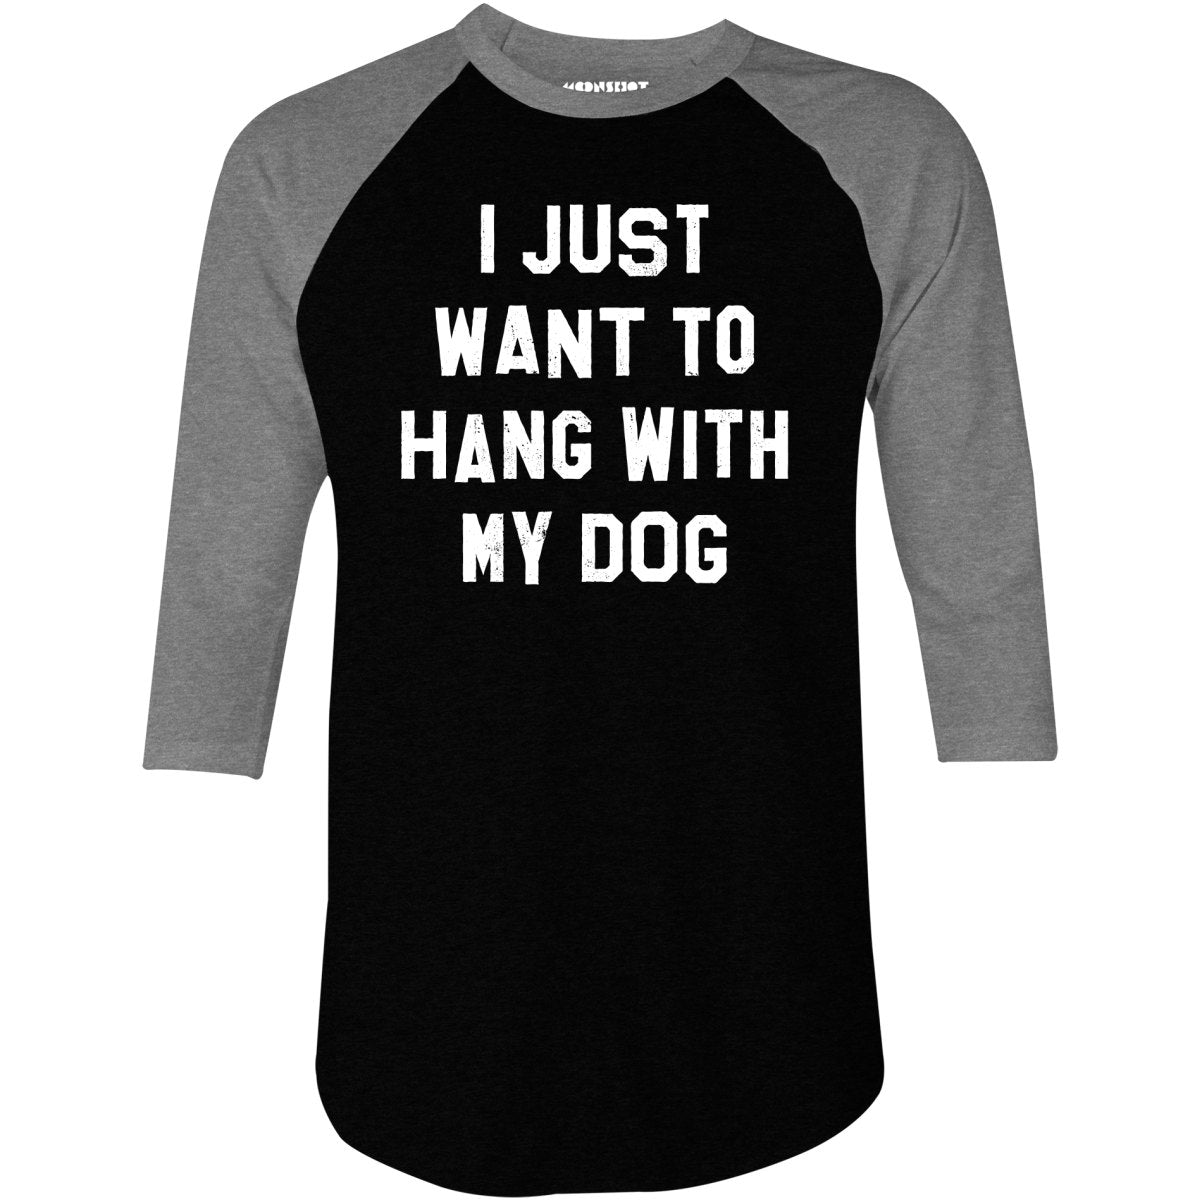 I Just Want to Hang With My Dog - 3/4 Sleeve Raglan T-Shirt